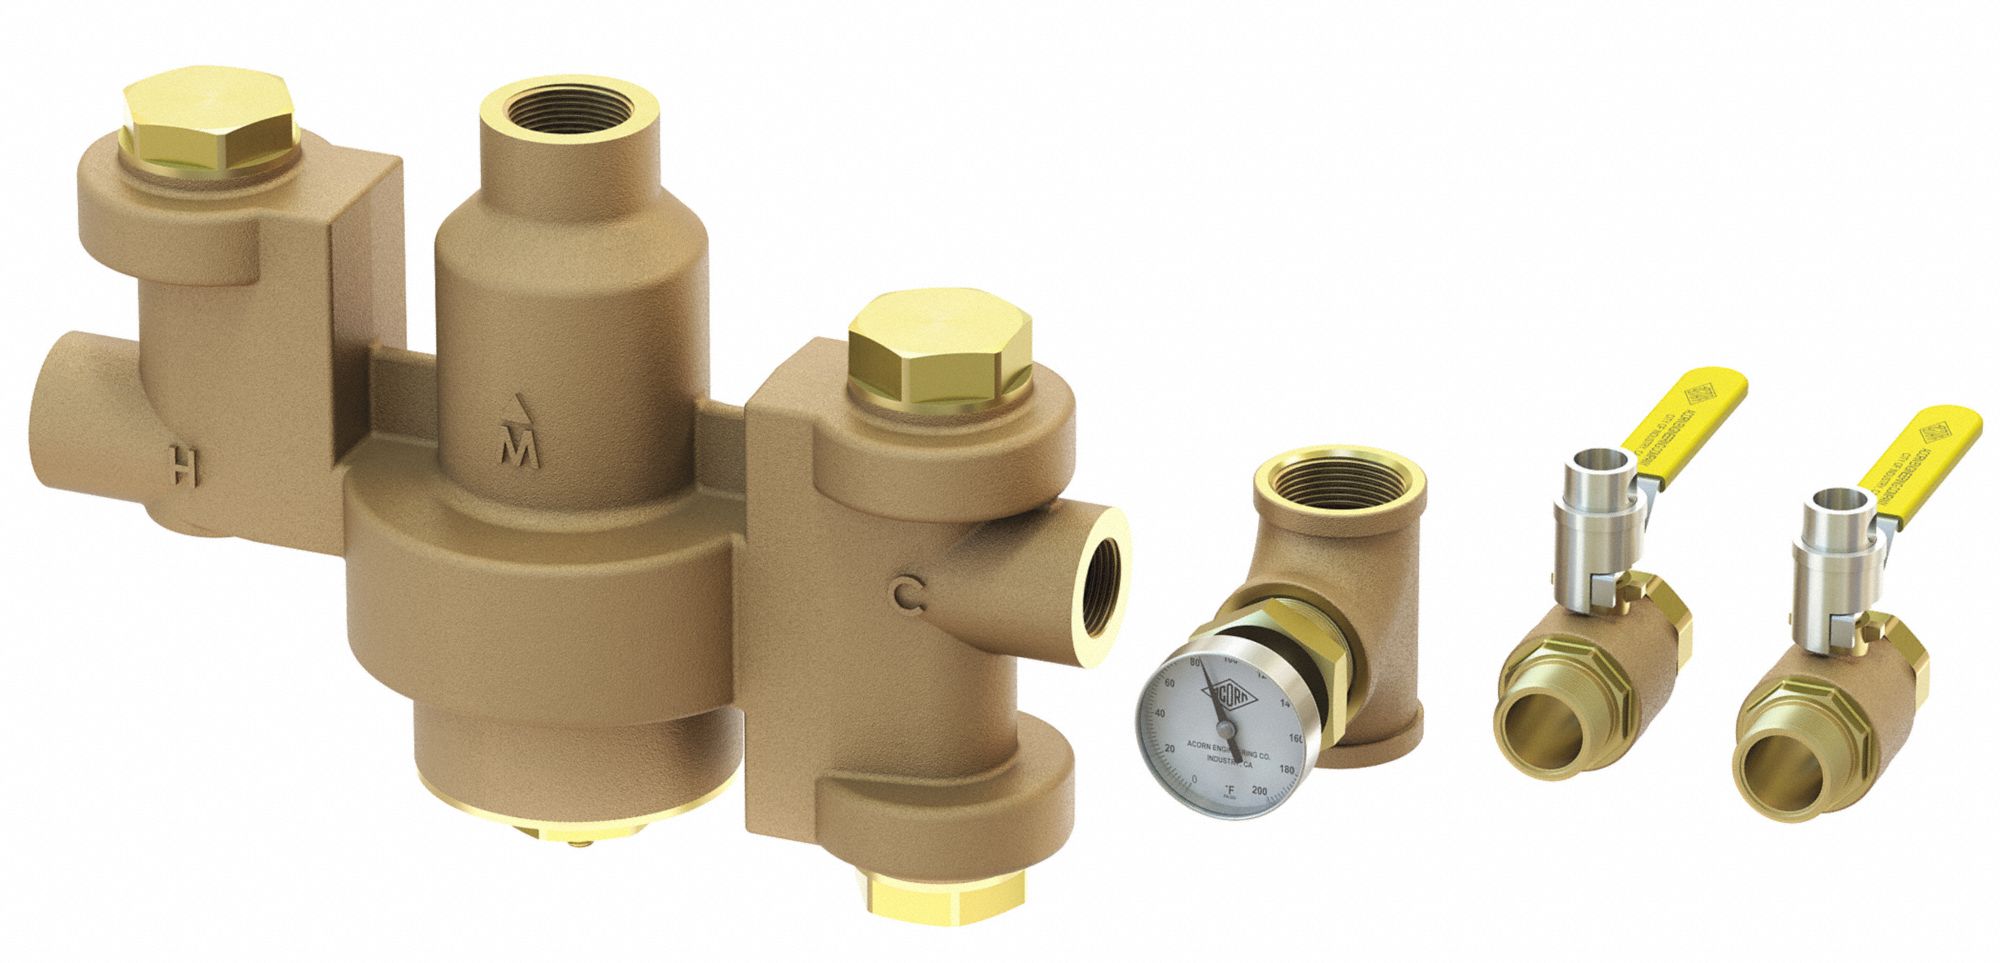 Thermostatic Mixing Valve: ET71, Brass, 3/4 in Inlet Size, NPT Inlet, NPT Outlet